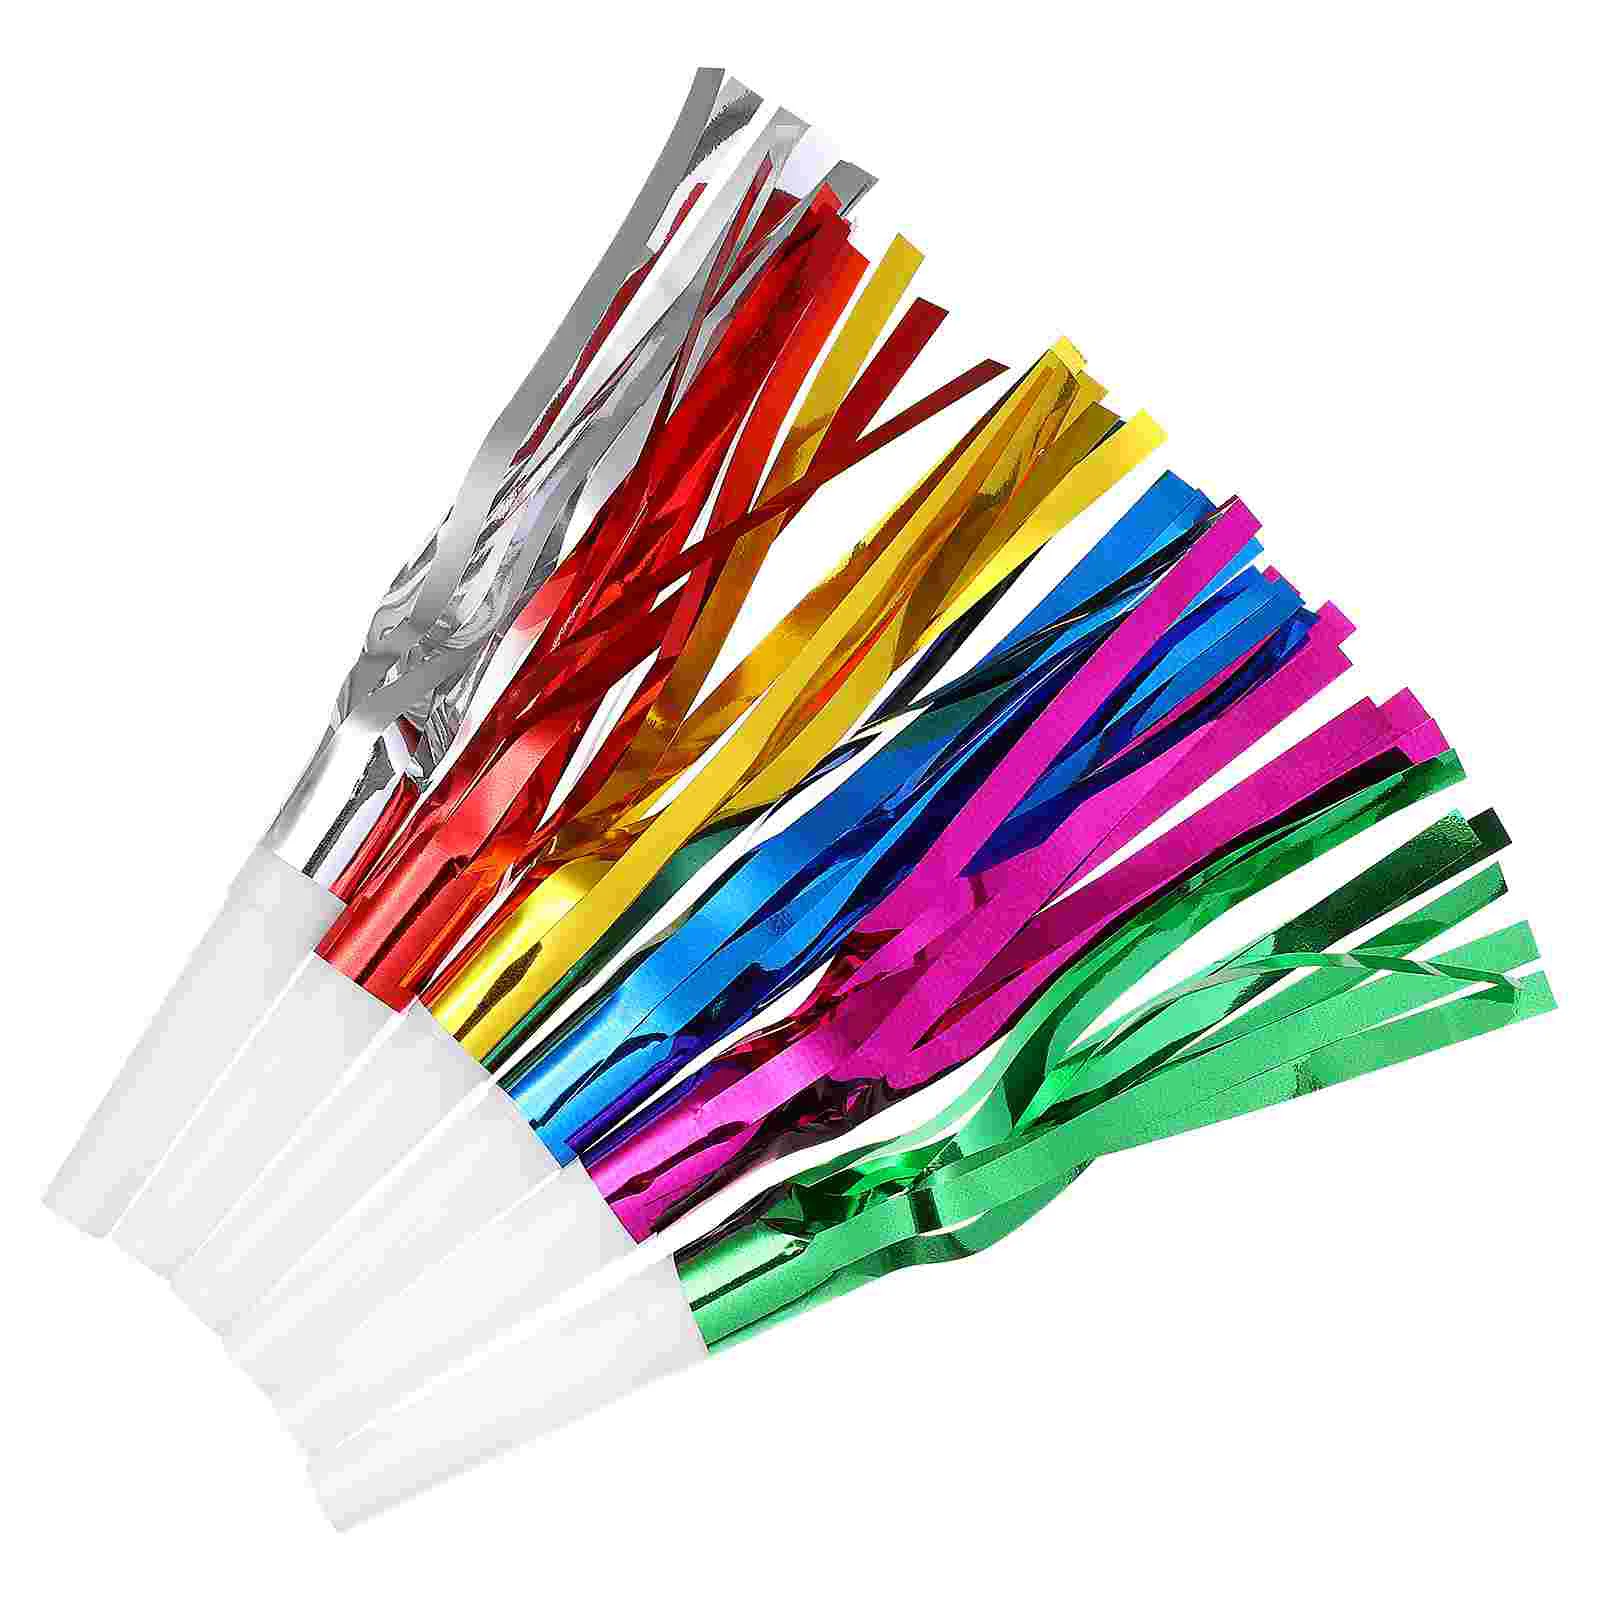 

Party Blowouts Blowers Favors Whistles Whistle Noise Noisemakers Supplies Musical Makers Fringed Birthday Blowout Horns Blower